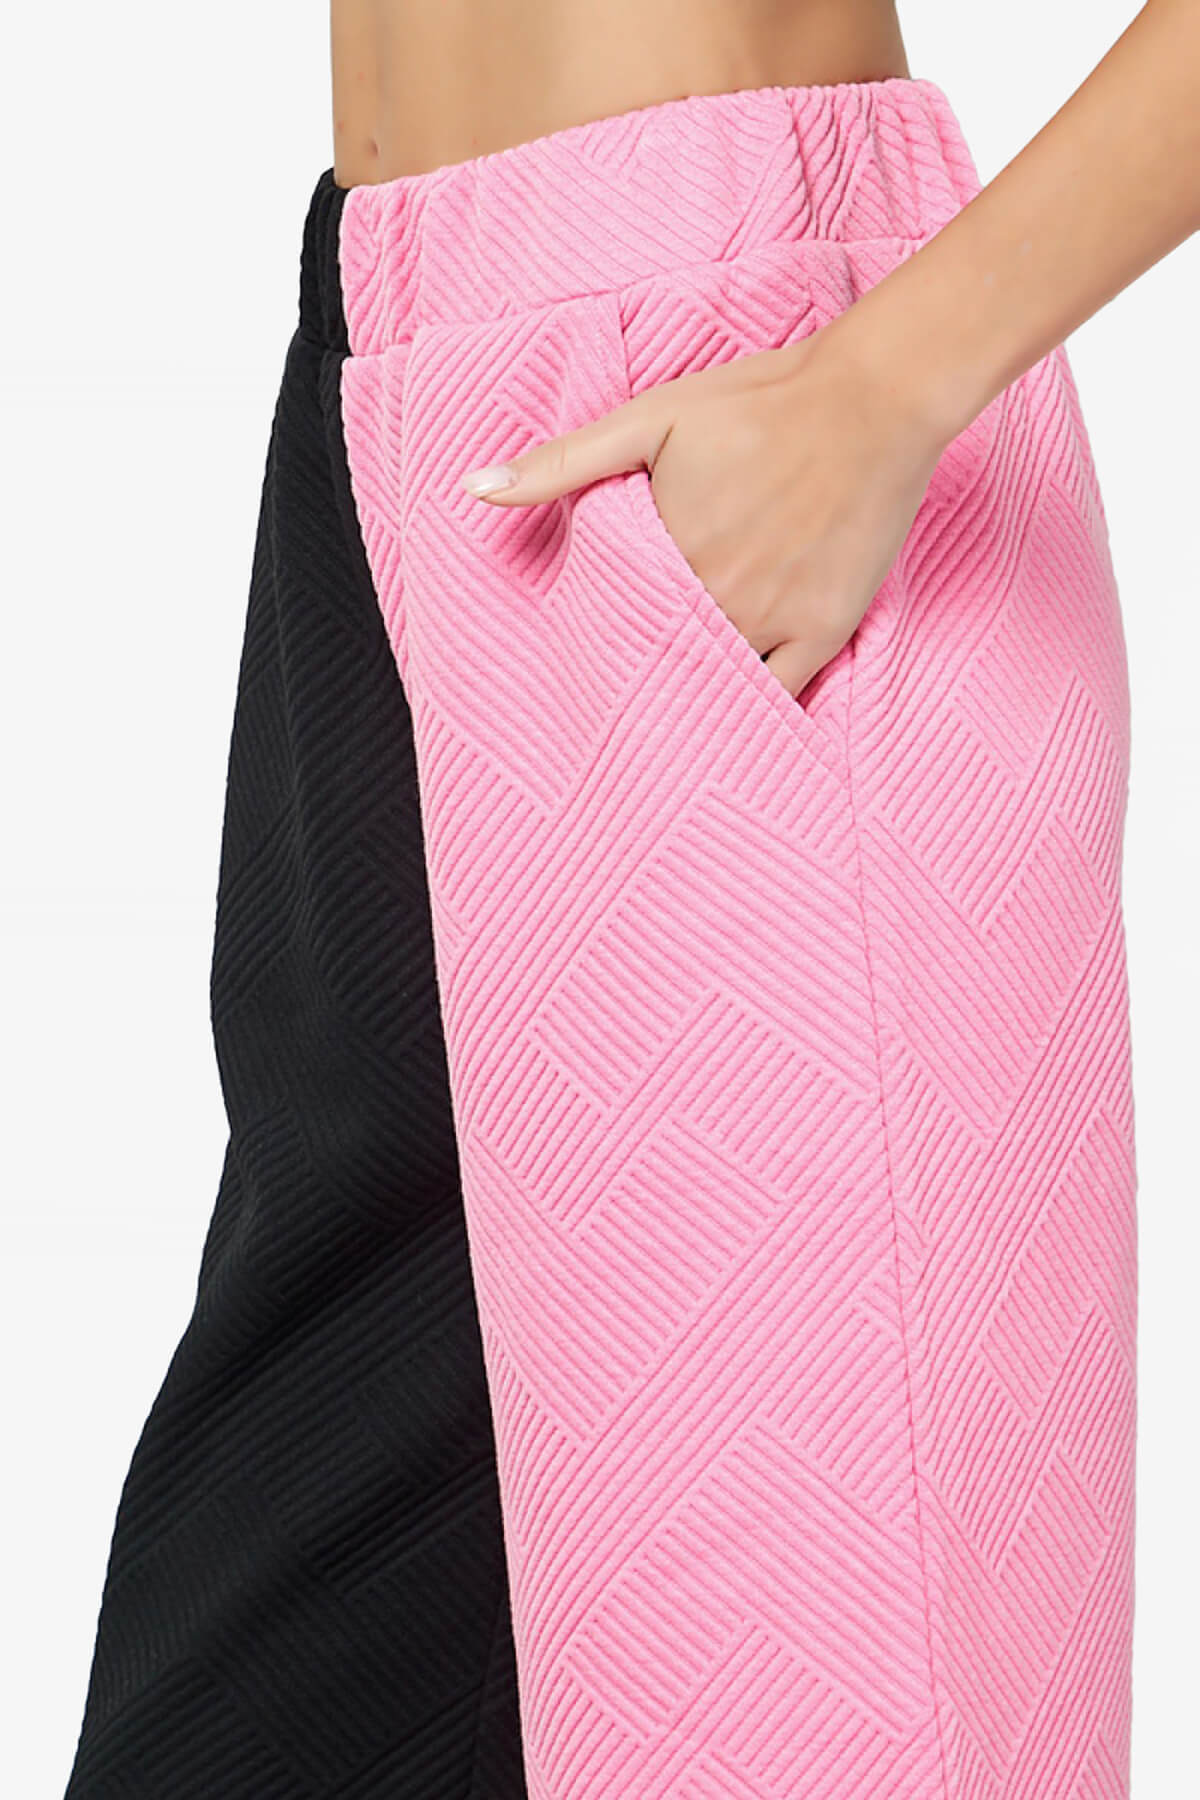 Lassy Textured Colorblock Lounge Culotte BLACK AND PINK_5